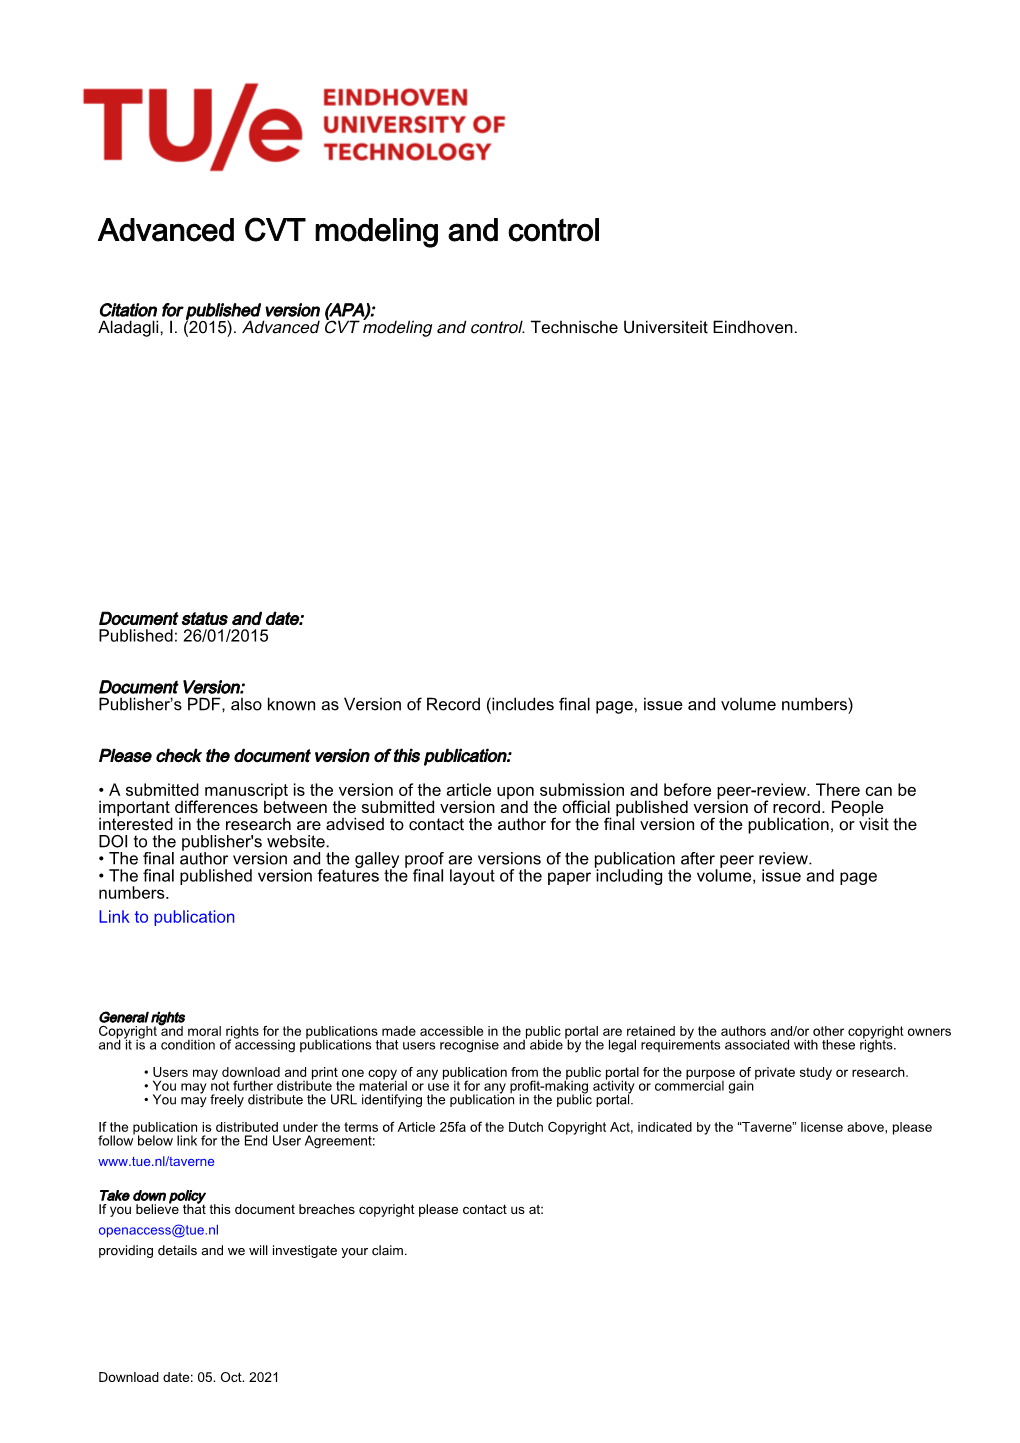 Advanced CVT Modeling and Control